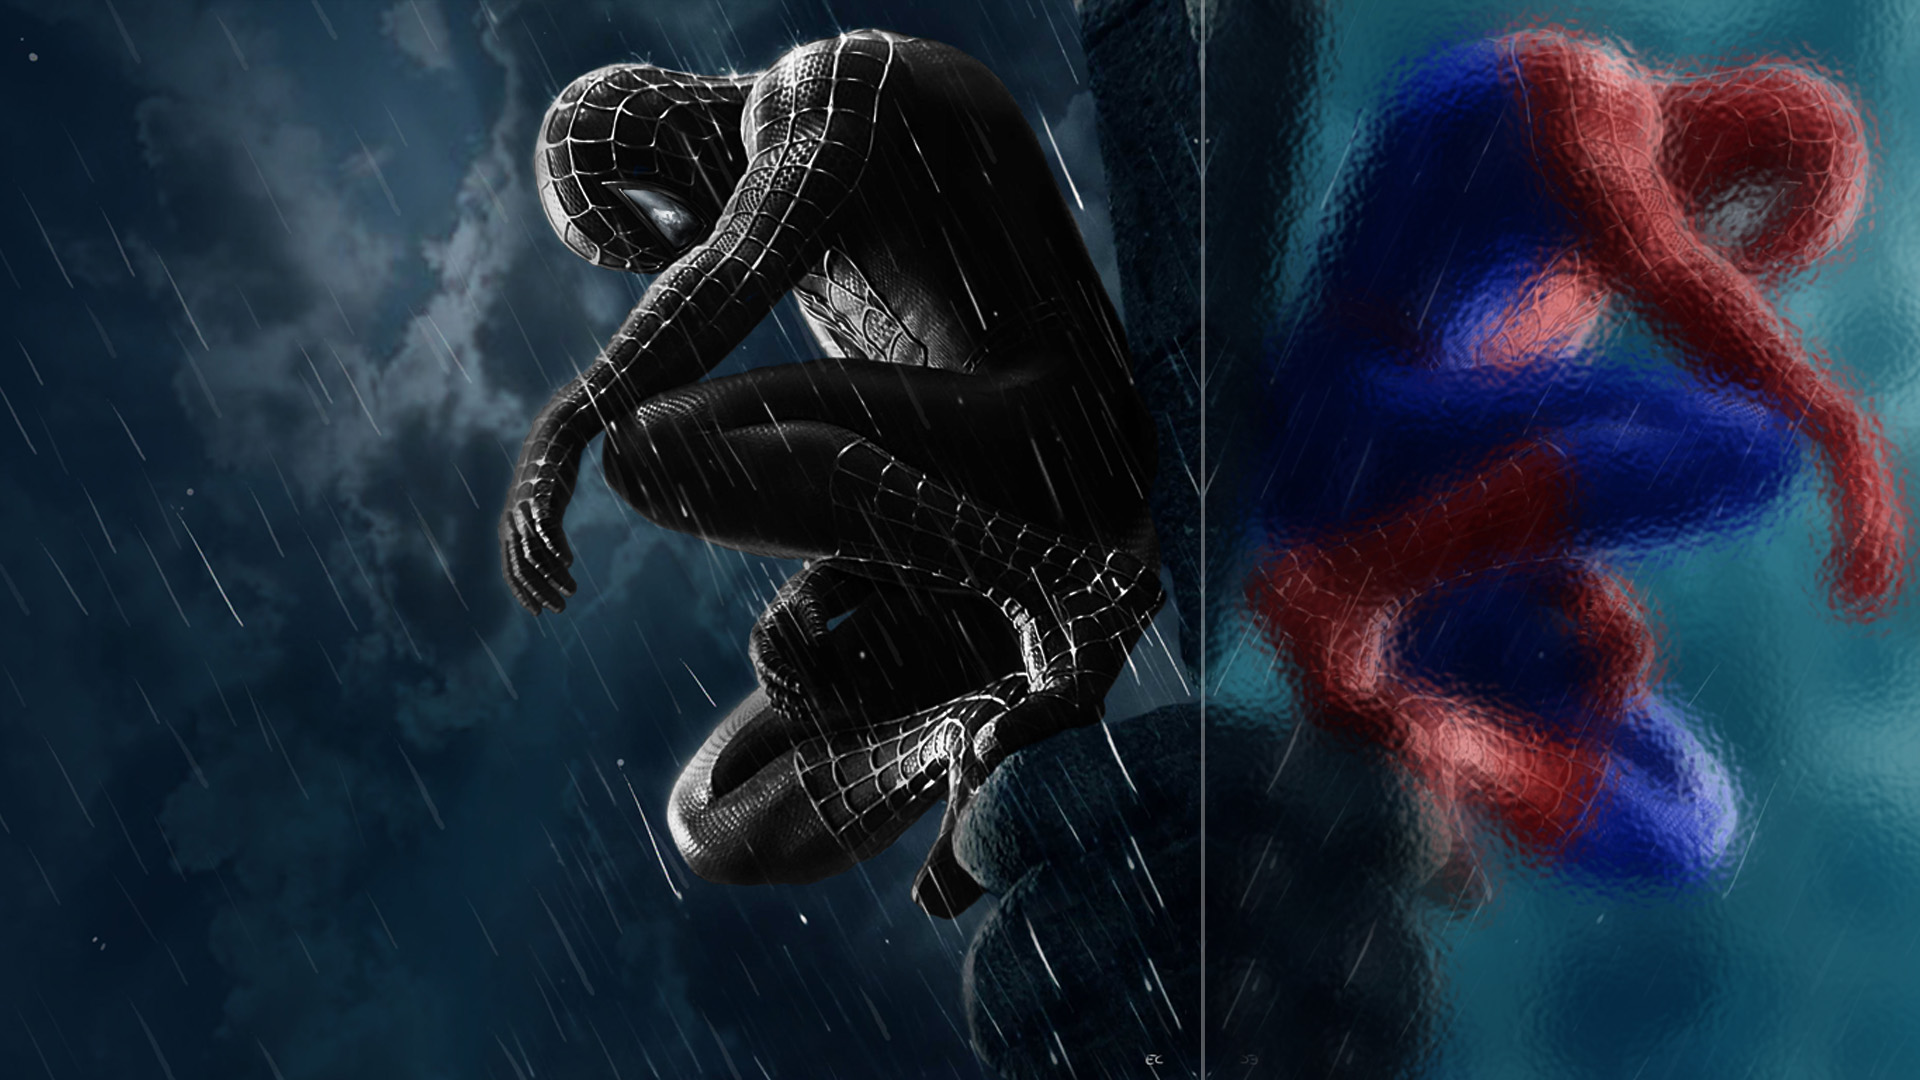 Spiderman wallpaper reflections x by omegacronalpha on